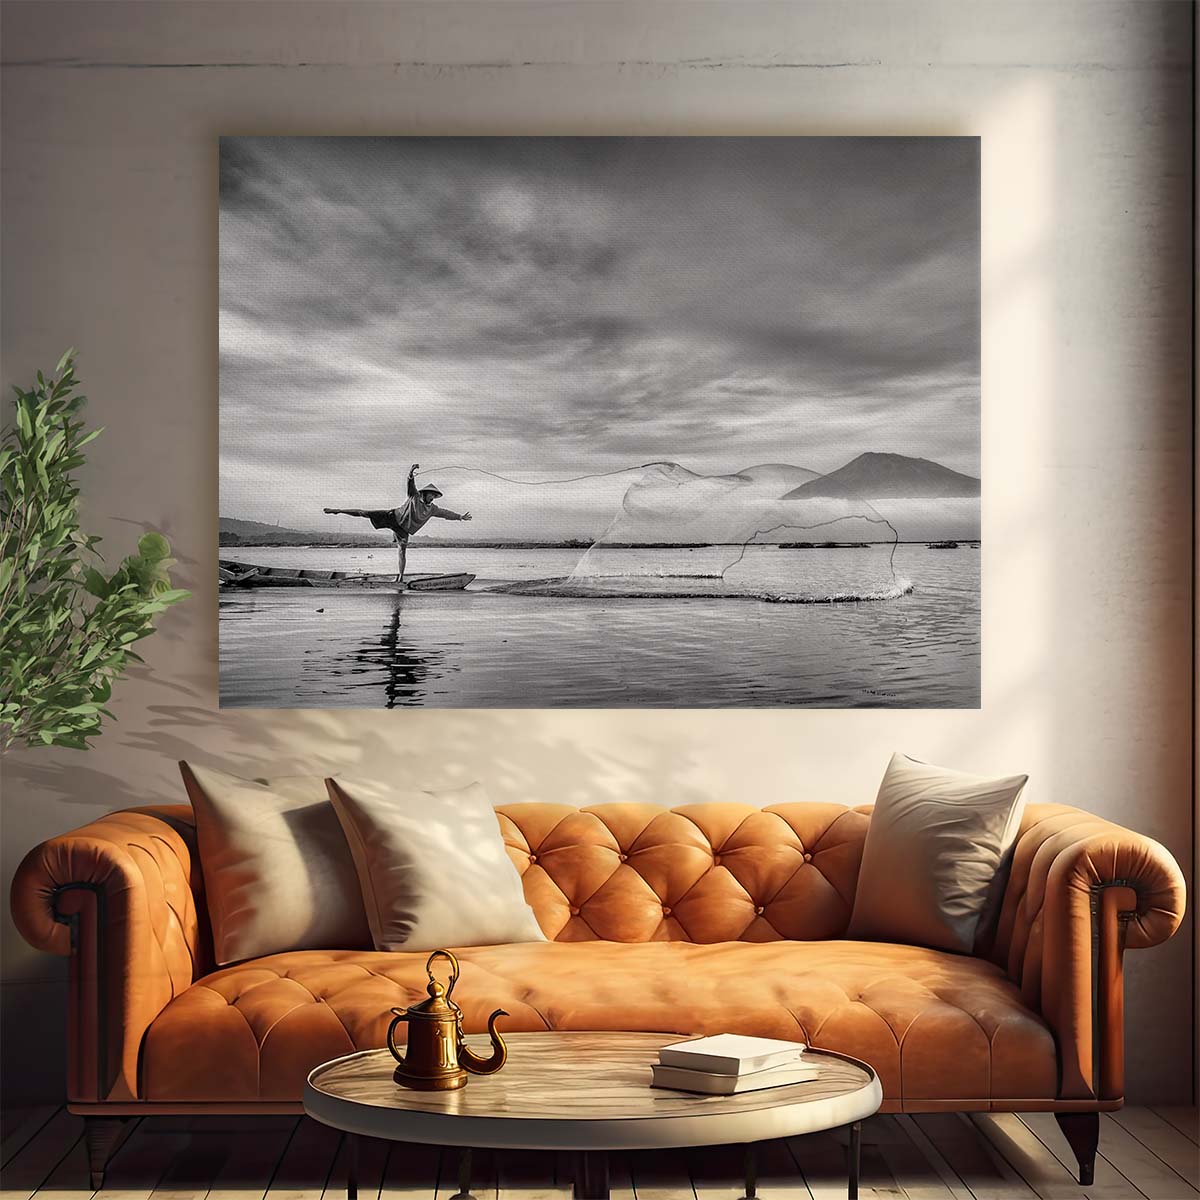 Sacred Fisherman's Balance Monochrome Lake Wall Art by Luxuriance Designs. Made in USA.